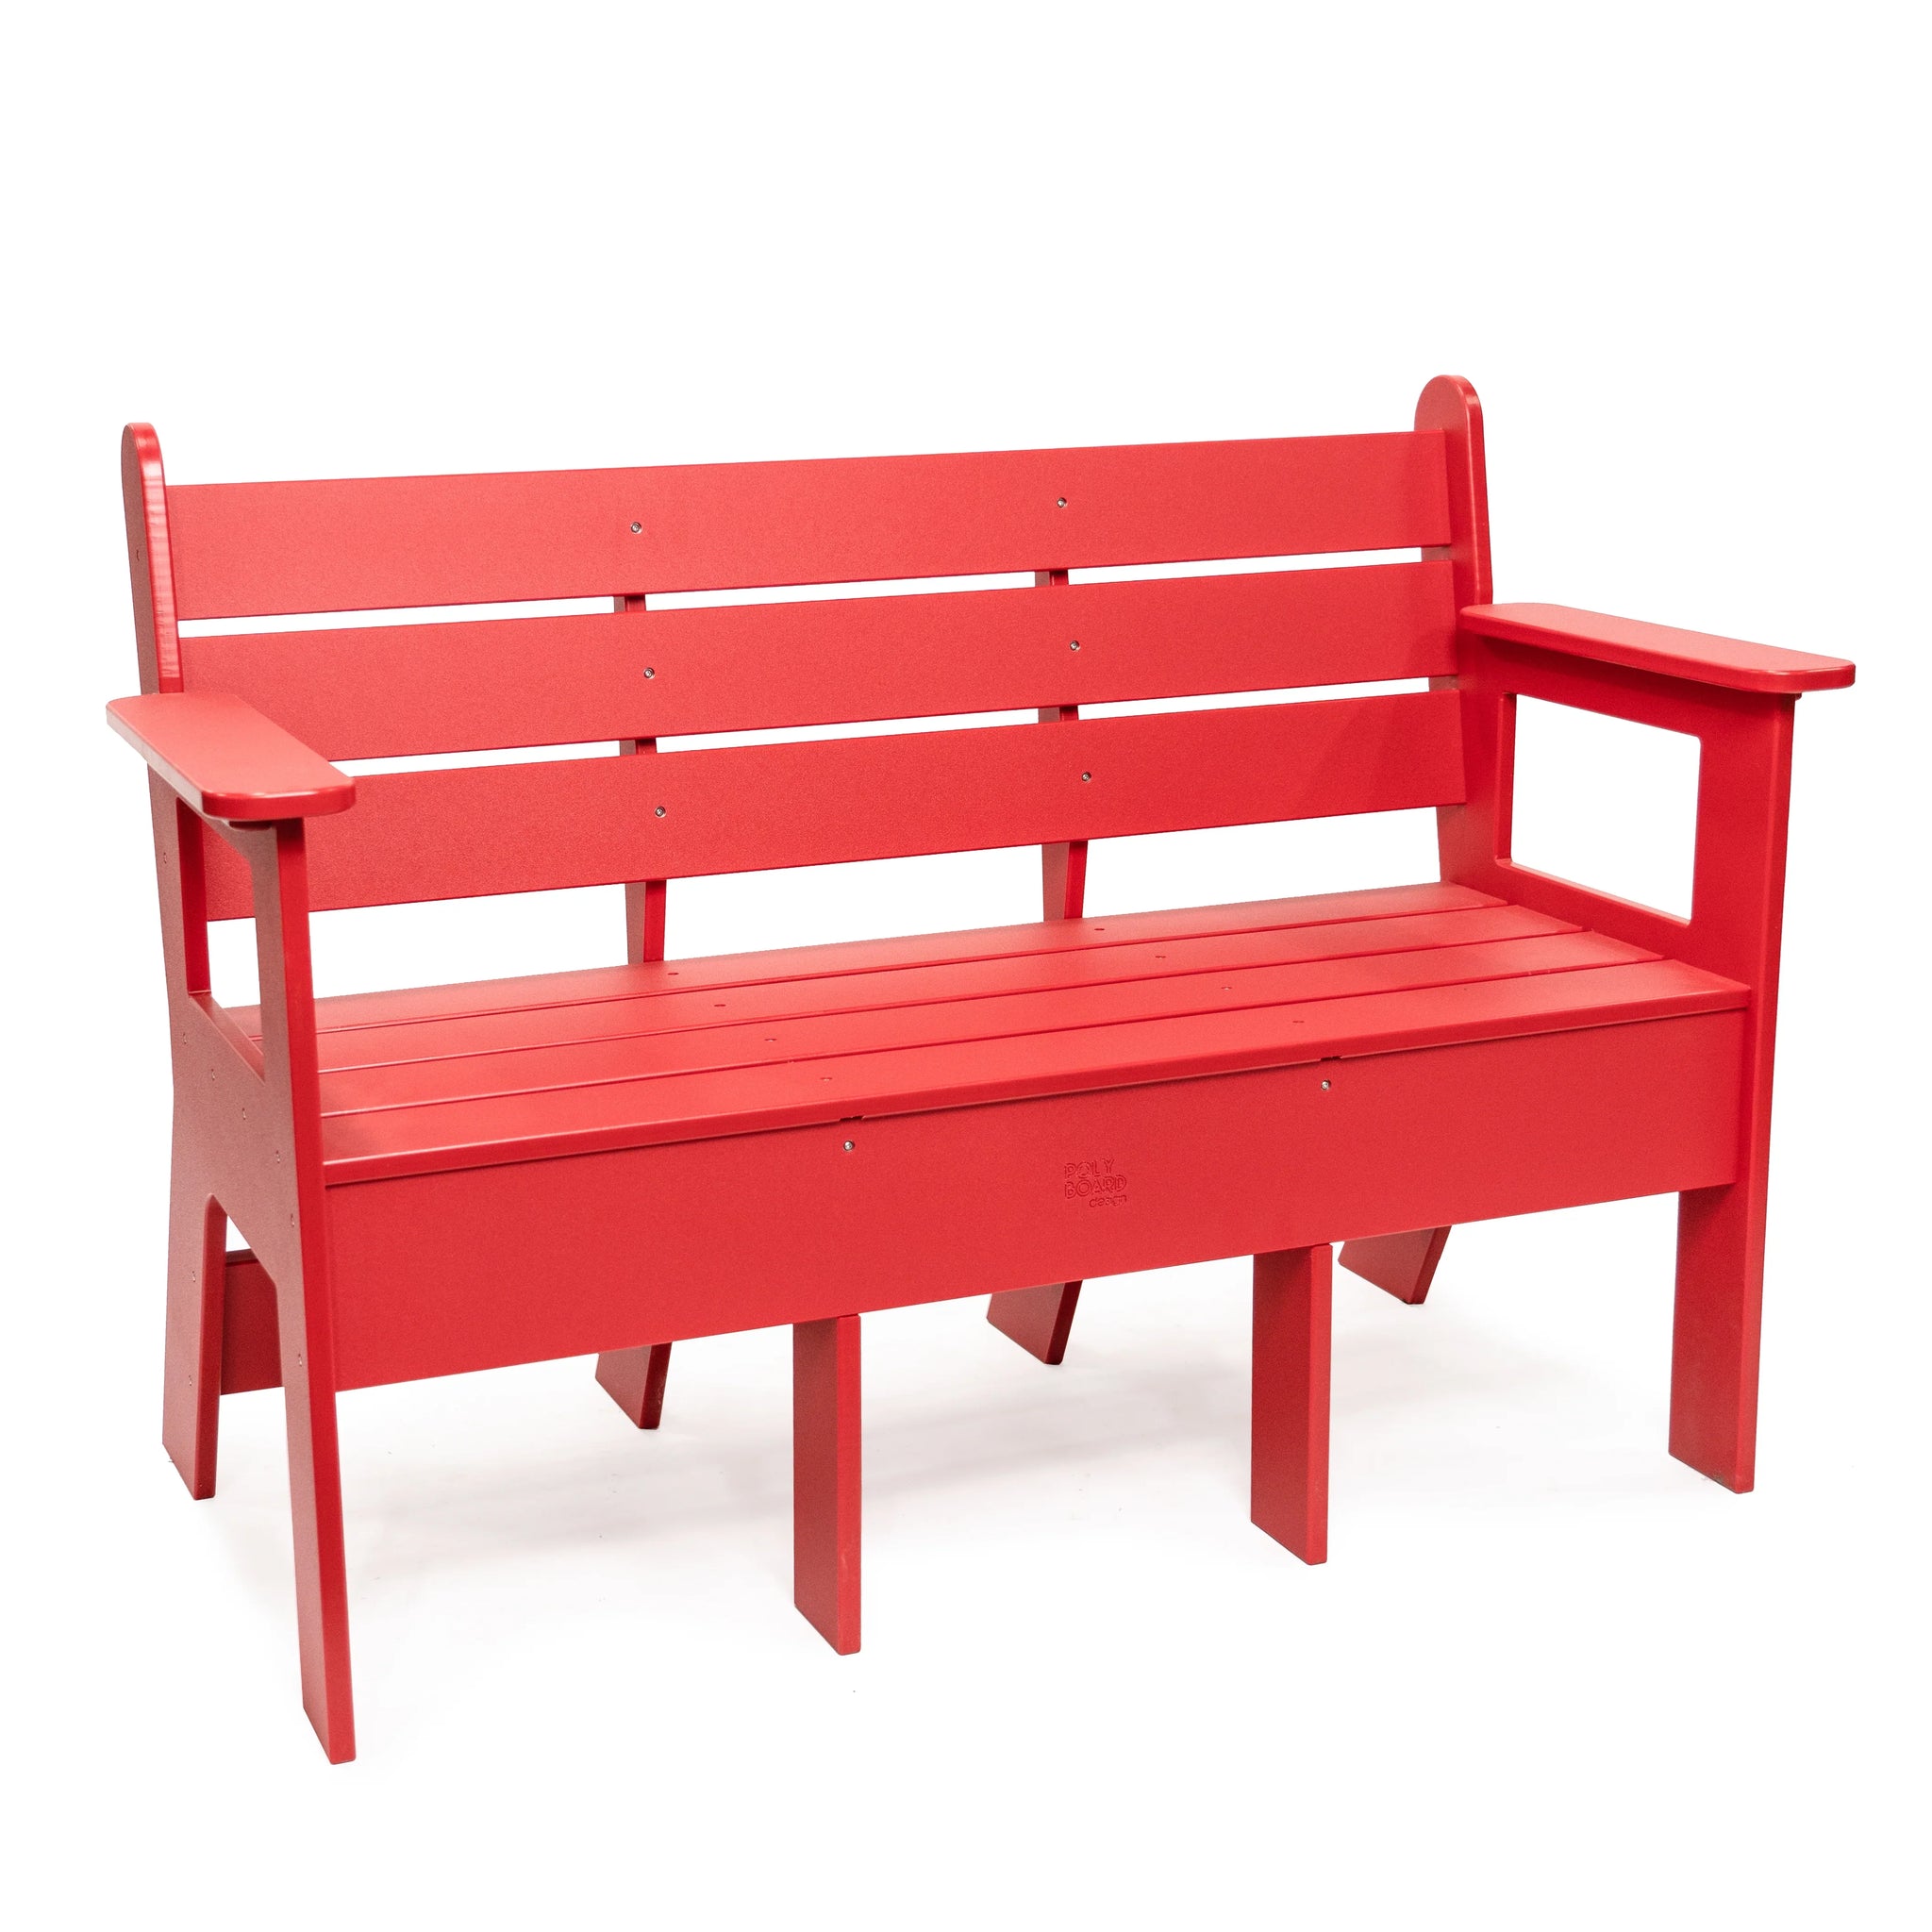 Red Bench With Custom Wood Furniture Designs Made By Ben S. Using Keda  Liquid Dyes